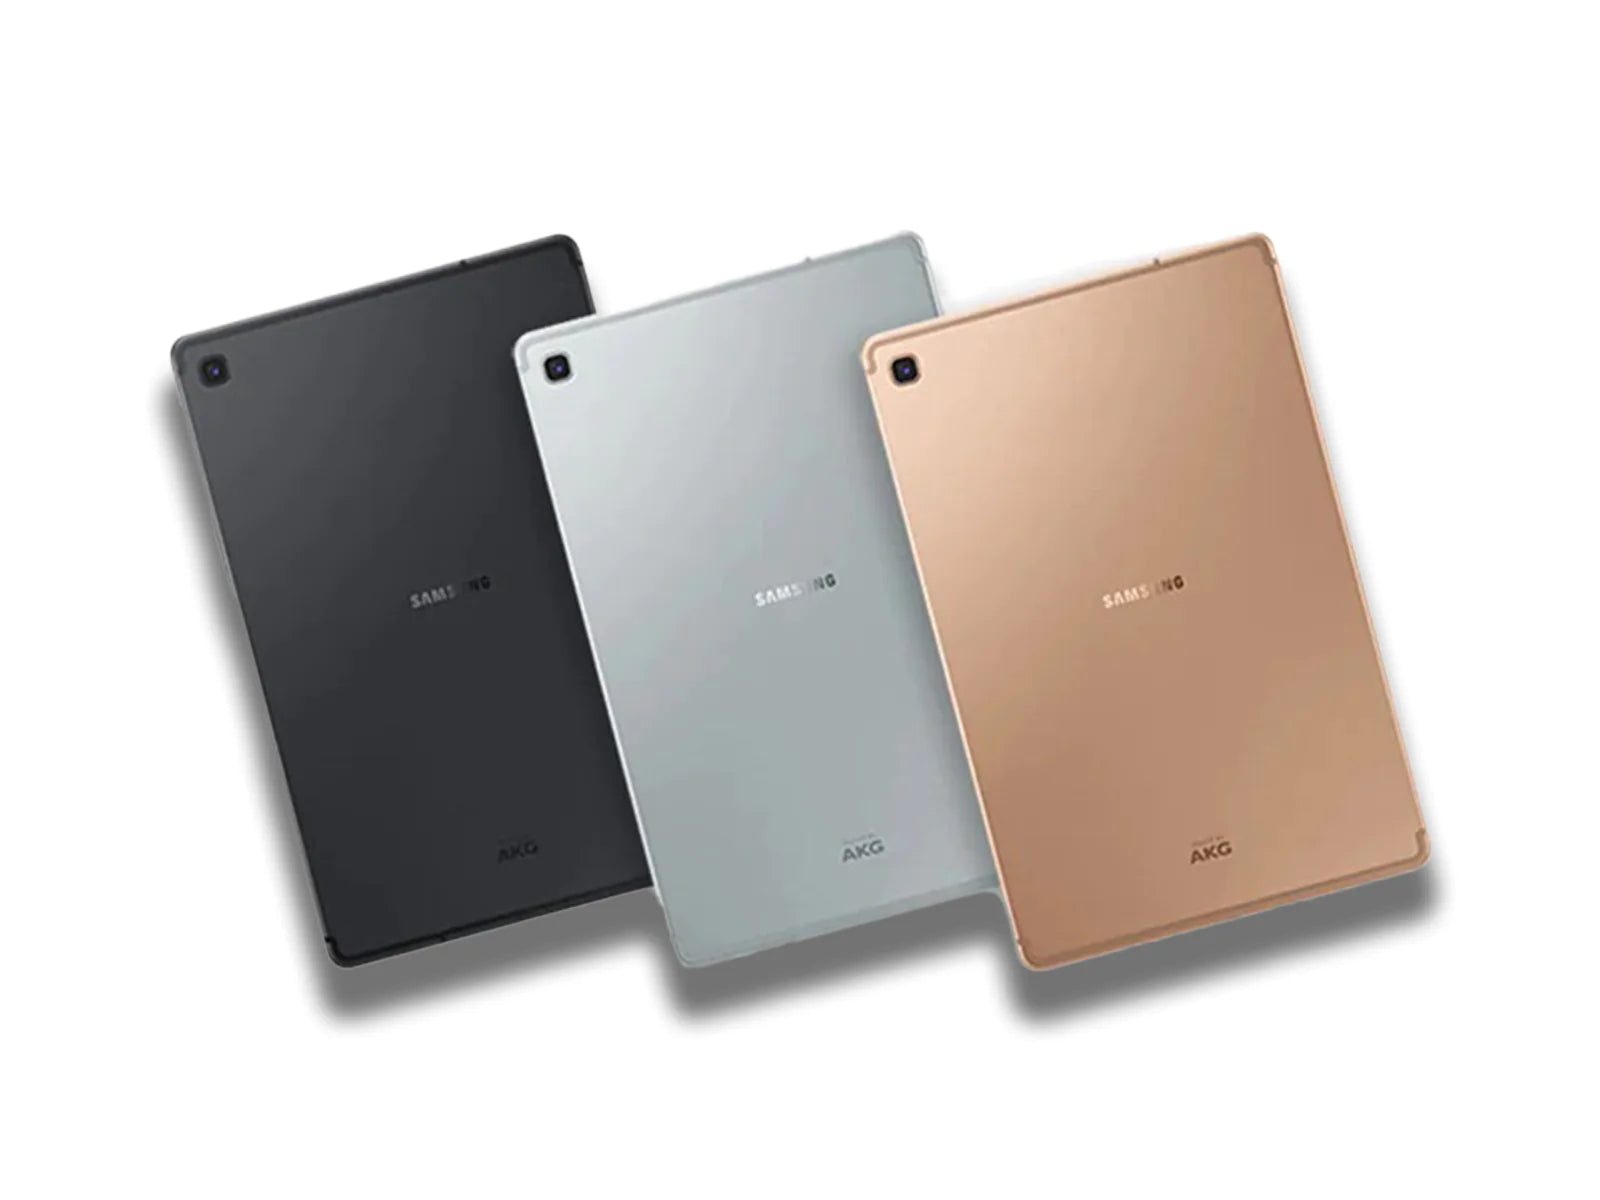 Image-showing-black-silver-and-gold-variations-of-the-samsung-galaxy-tab-s5e-lte-tablets-on-the-white-background